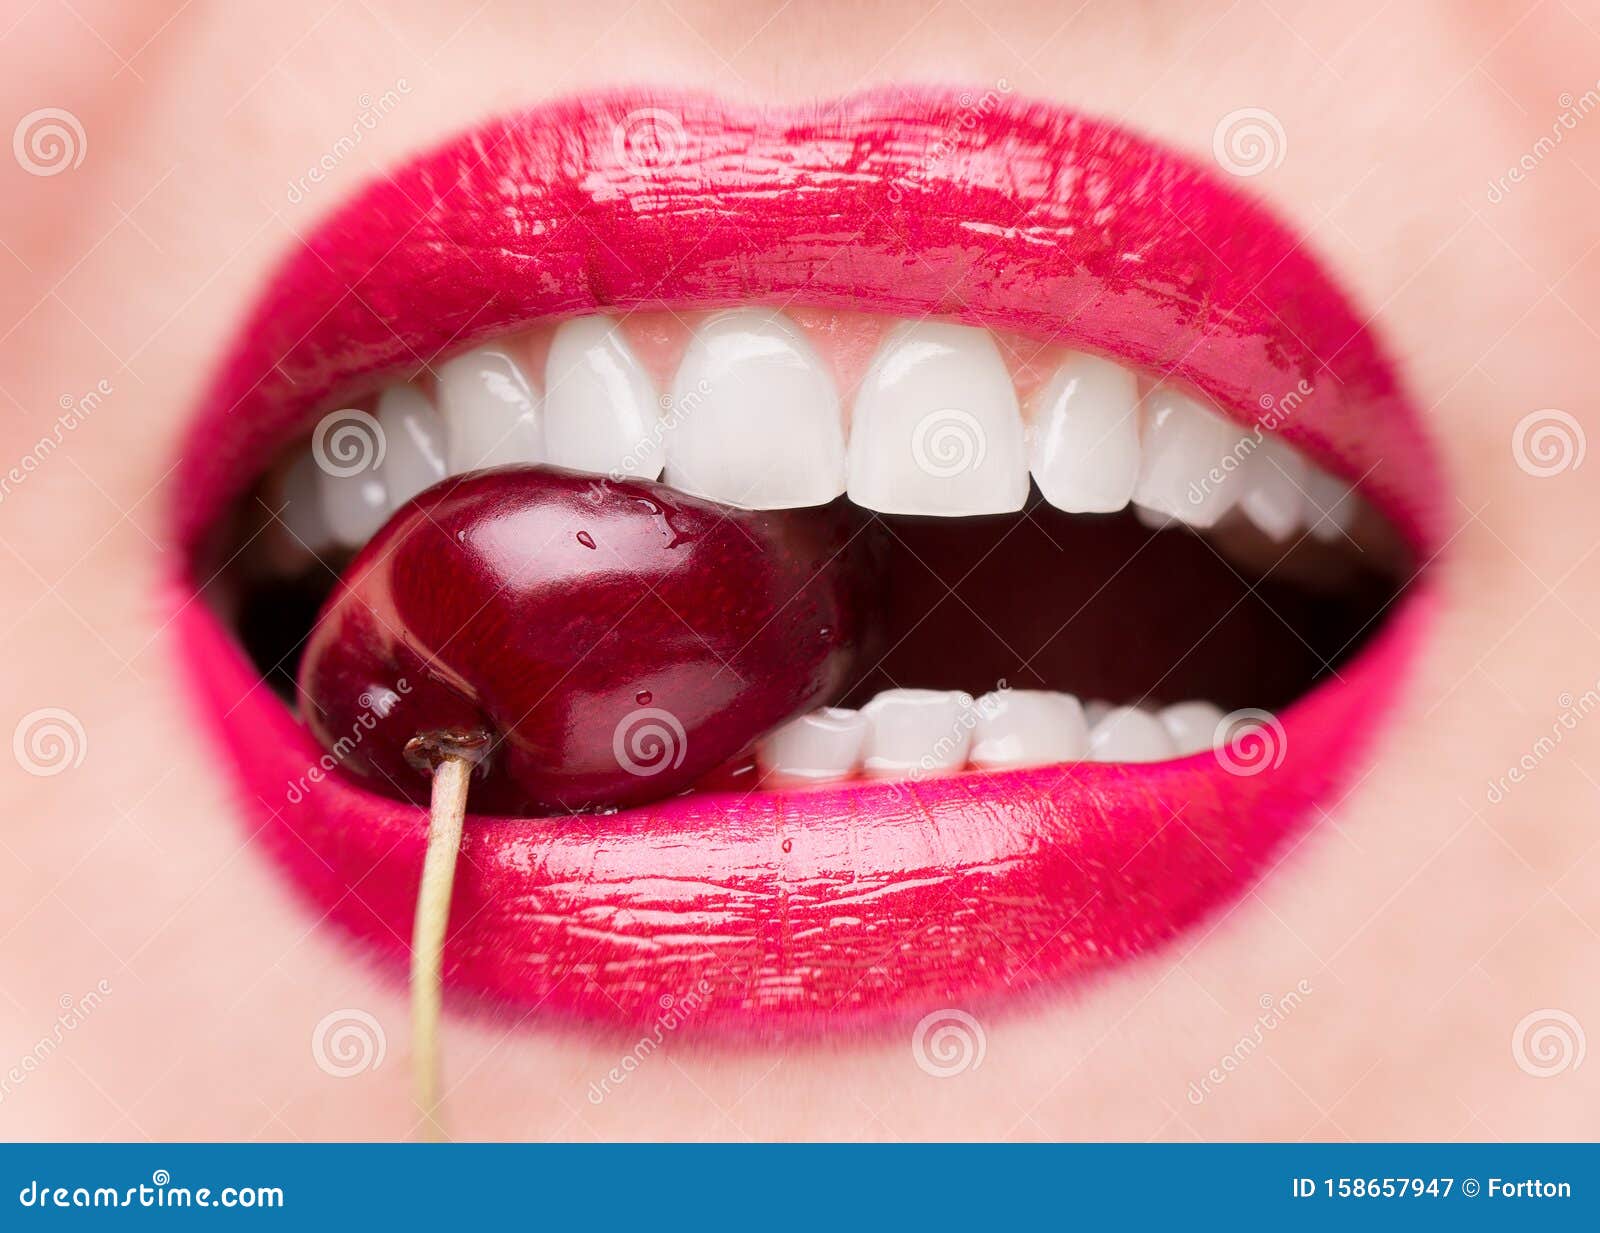 Sexy Woman Eating Ripe Cherry Stock Image - Image: 5402051